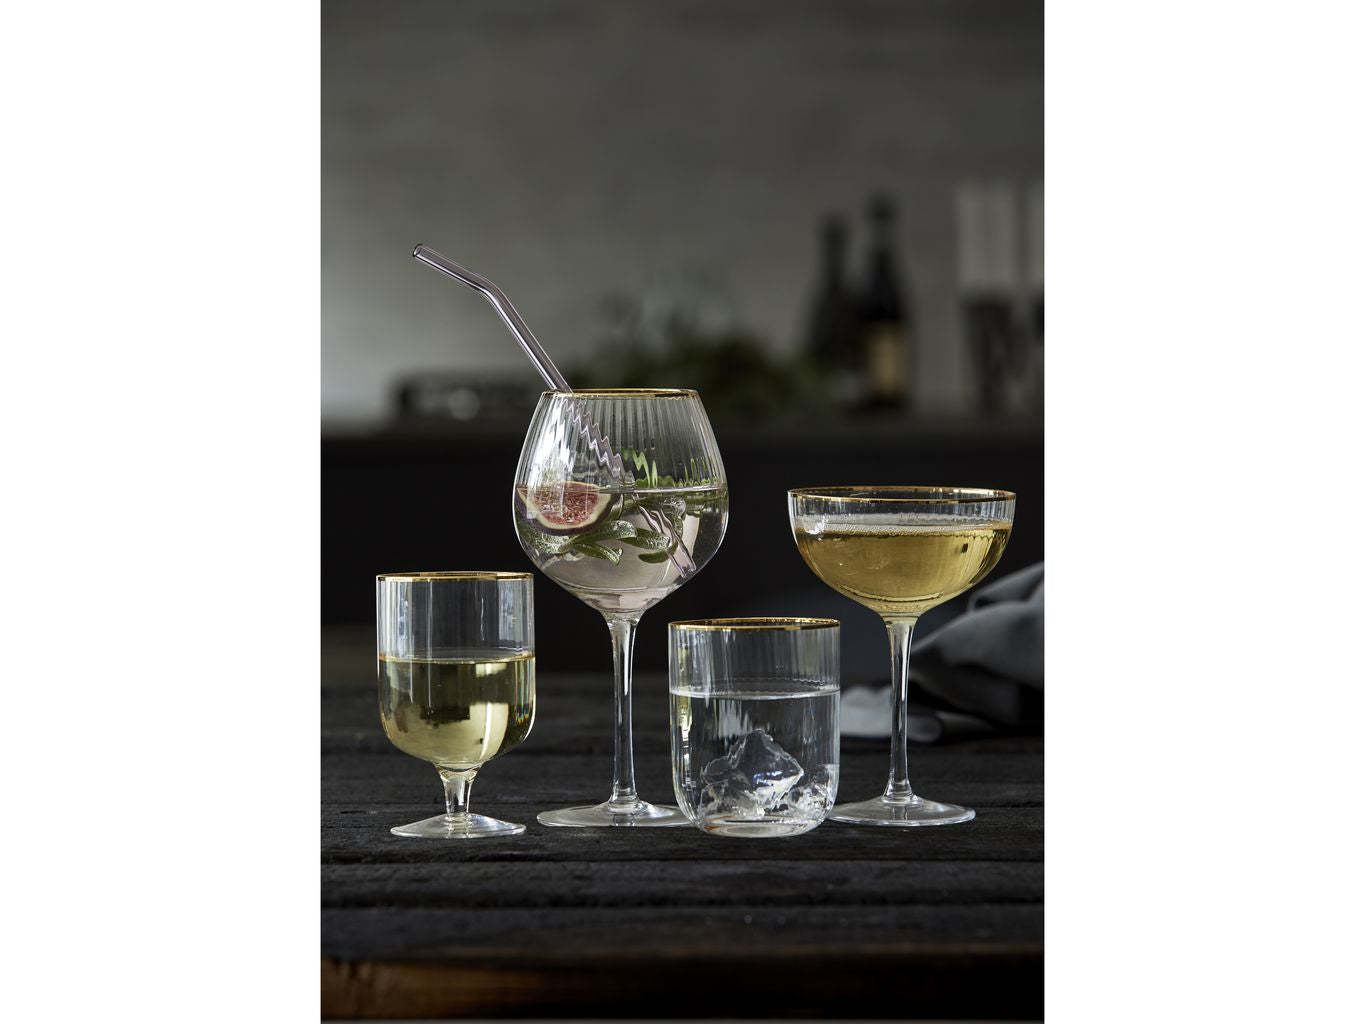 Lyngby Glas Palermo Gold Cocktailgläser 31,5 Cl, 4 Stcs.